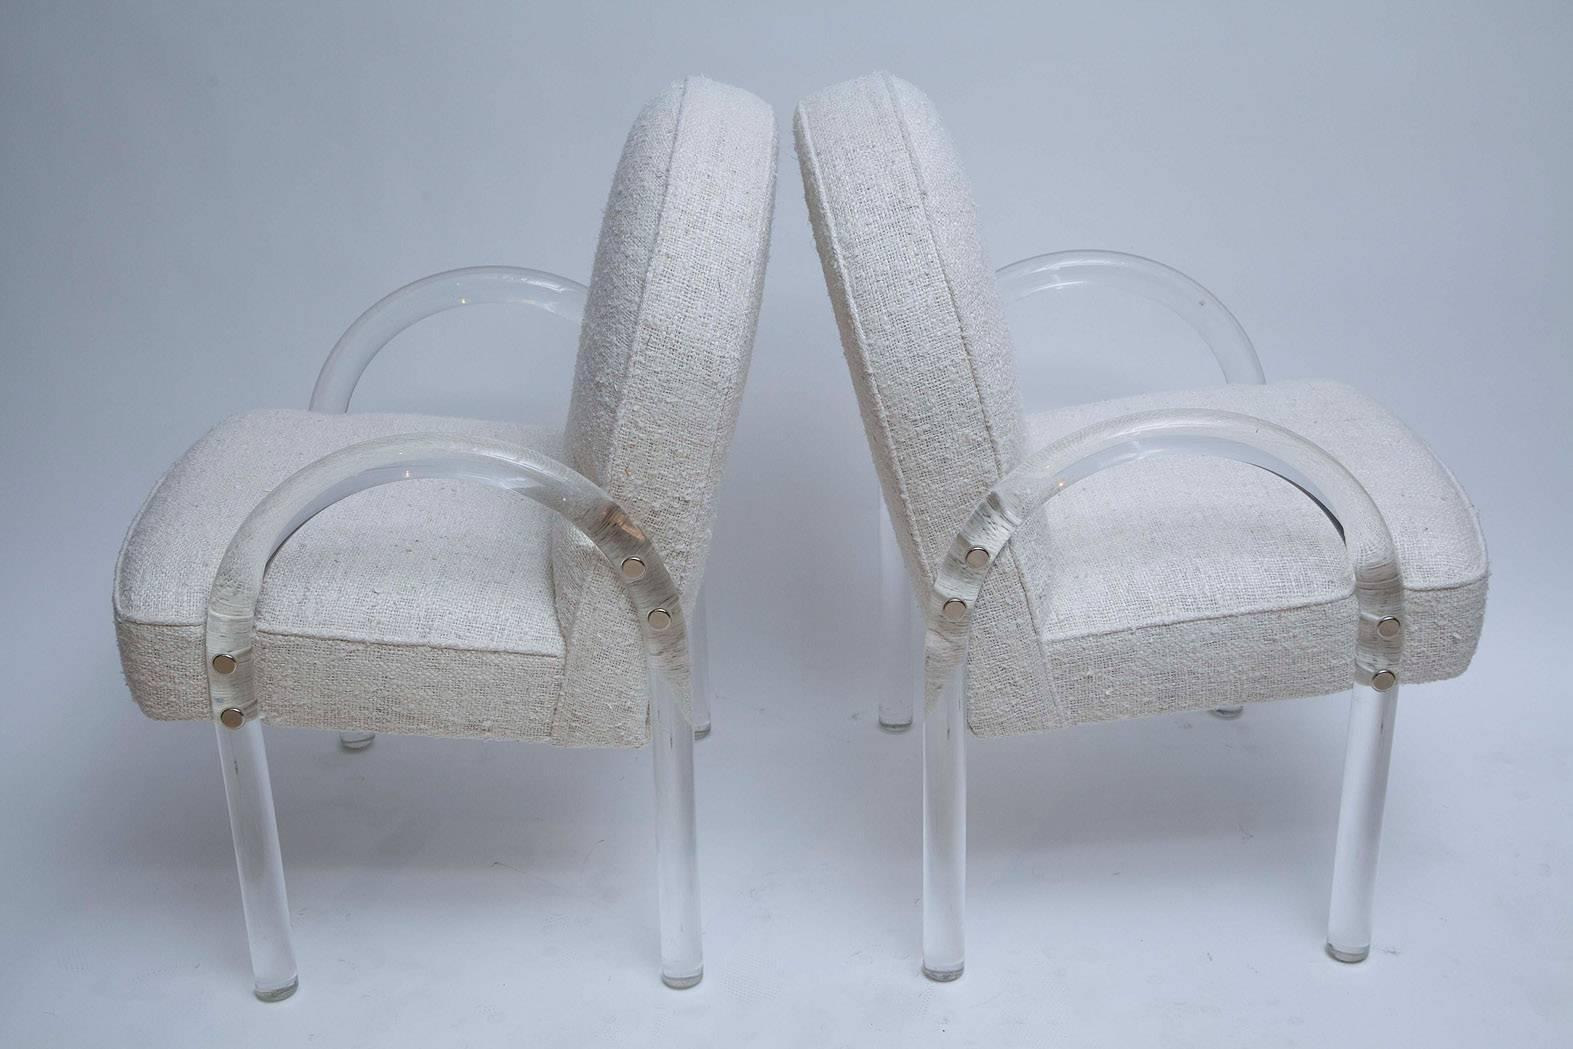 1970s Lucite armchairs by Pace collection, fully restored and upholstered in thick off-white, raw silk tweed.